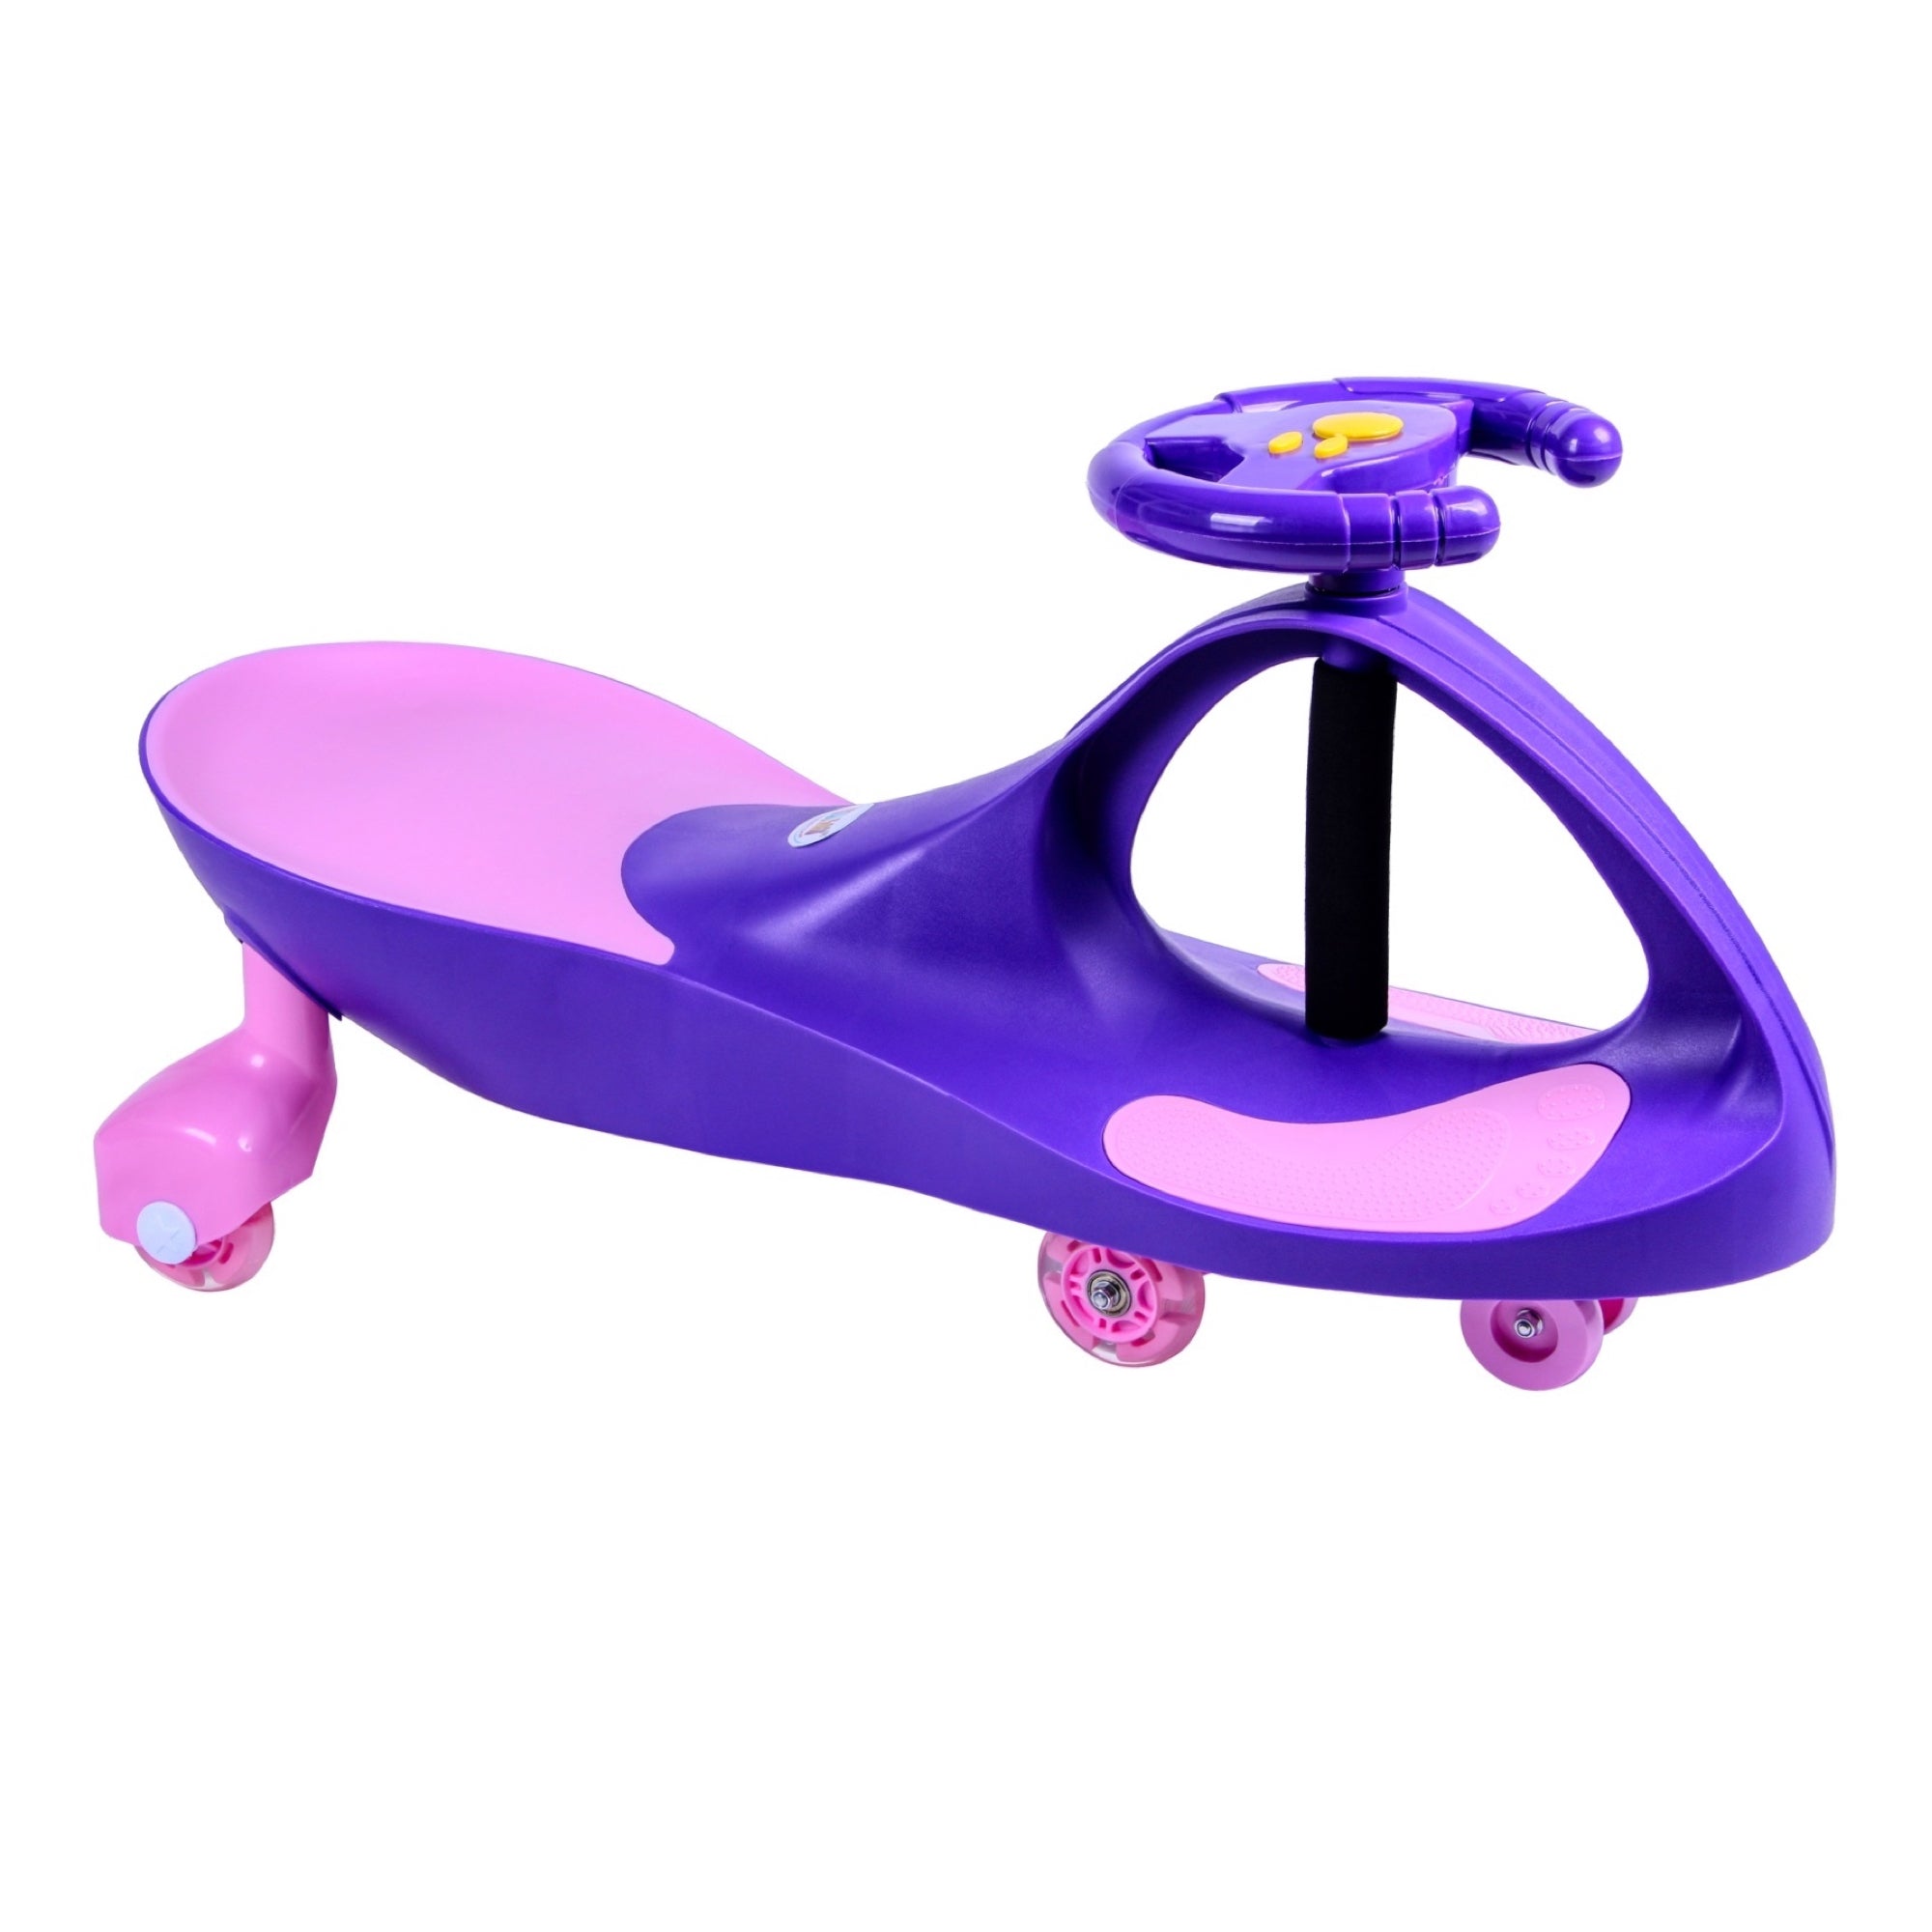 Joybay Purple Deluxe Voice Recorder Swing Car Ride on Toy with LED-Wheels